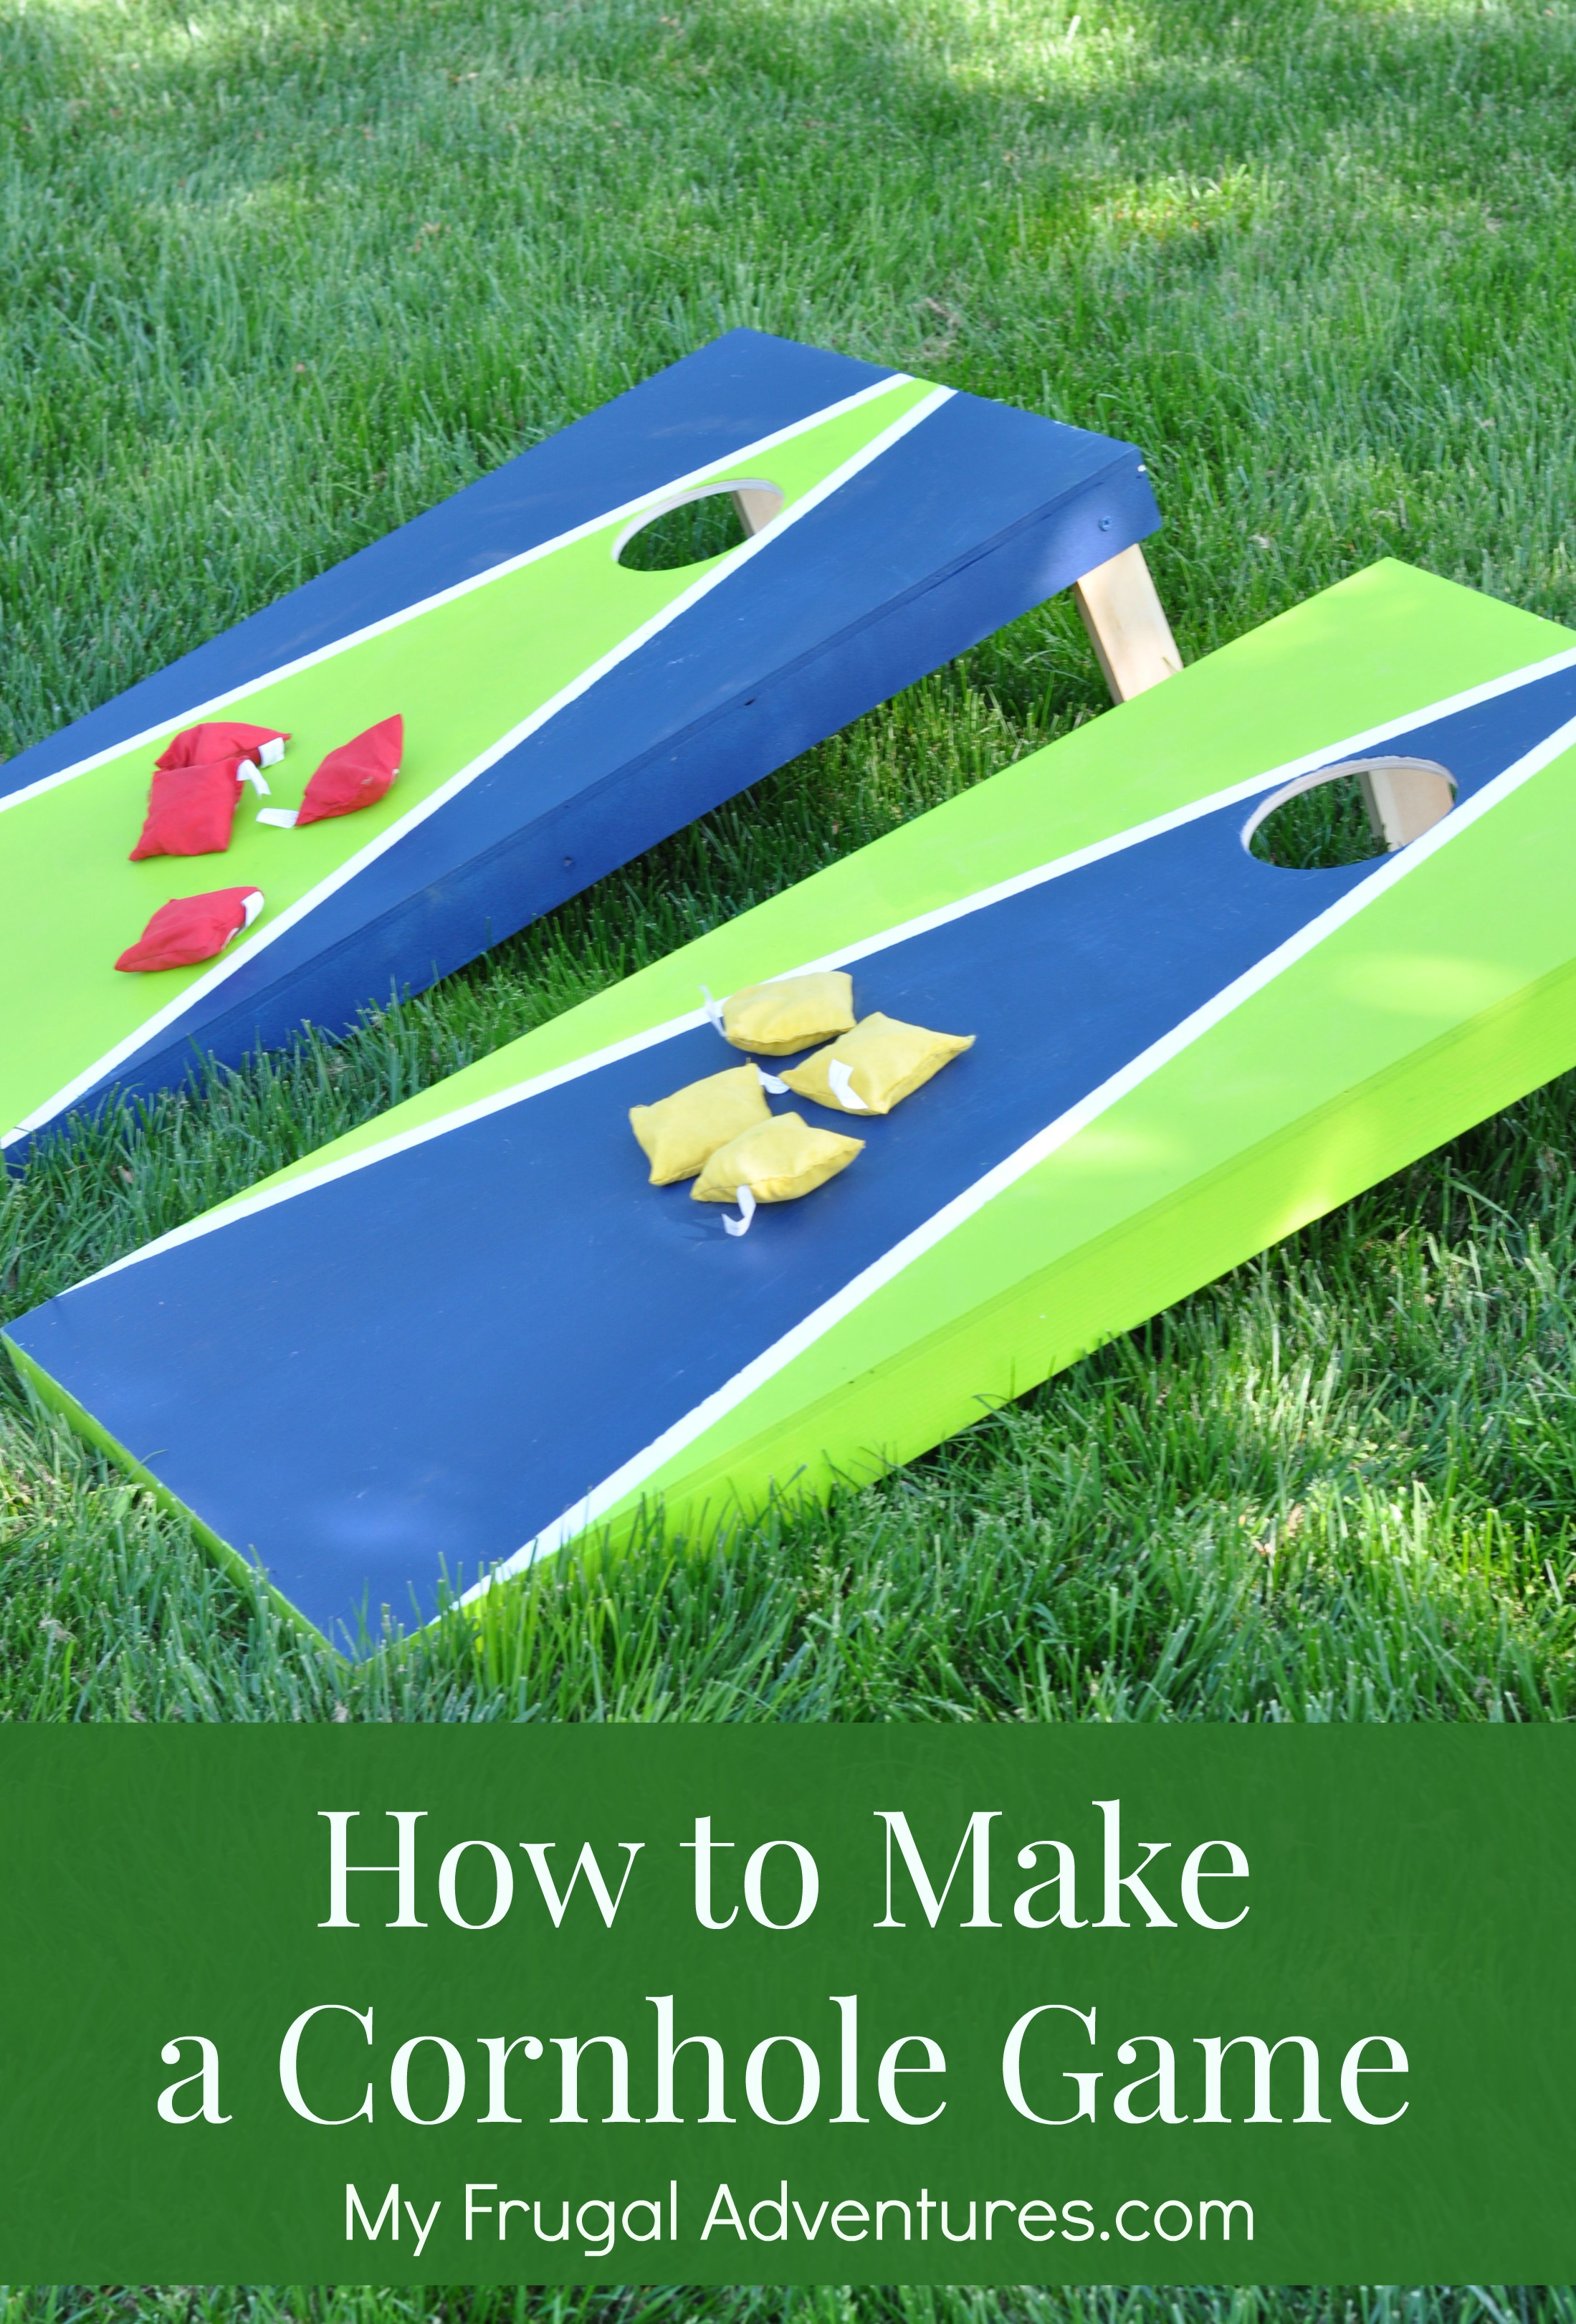 How to Make Cornhole Game - My Frugal Adventures